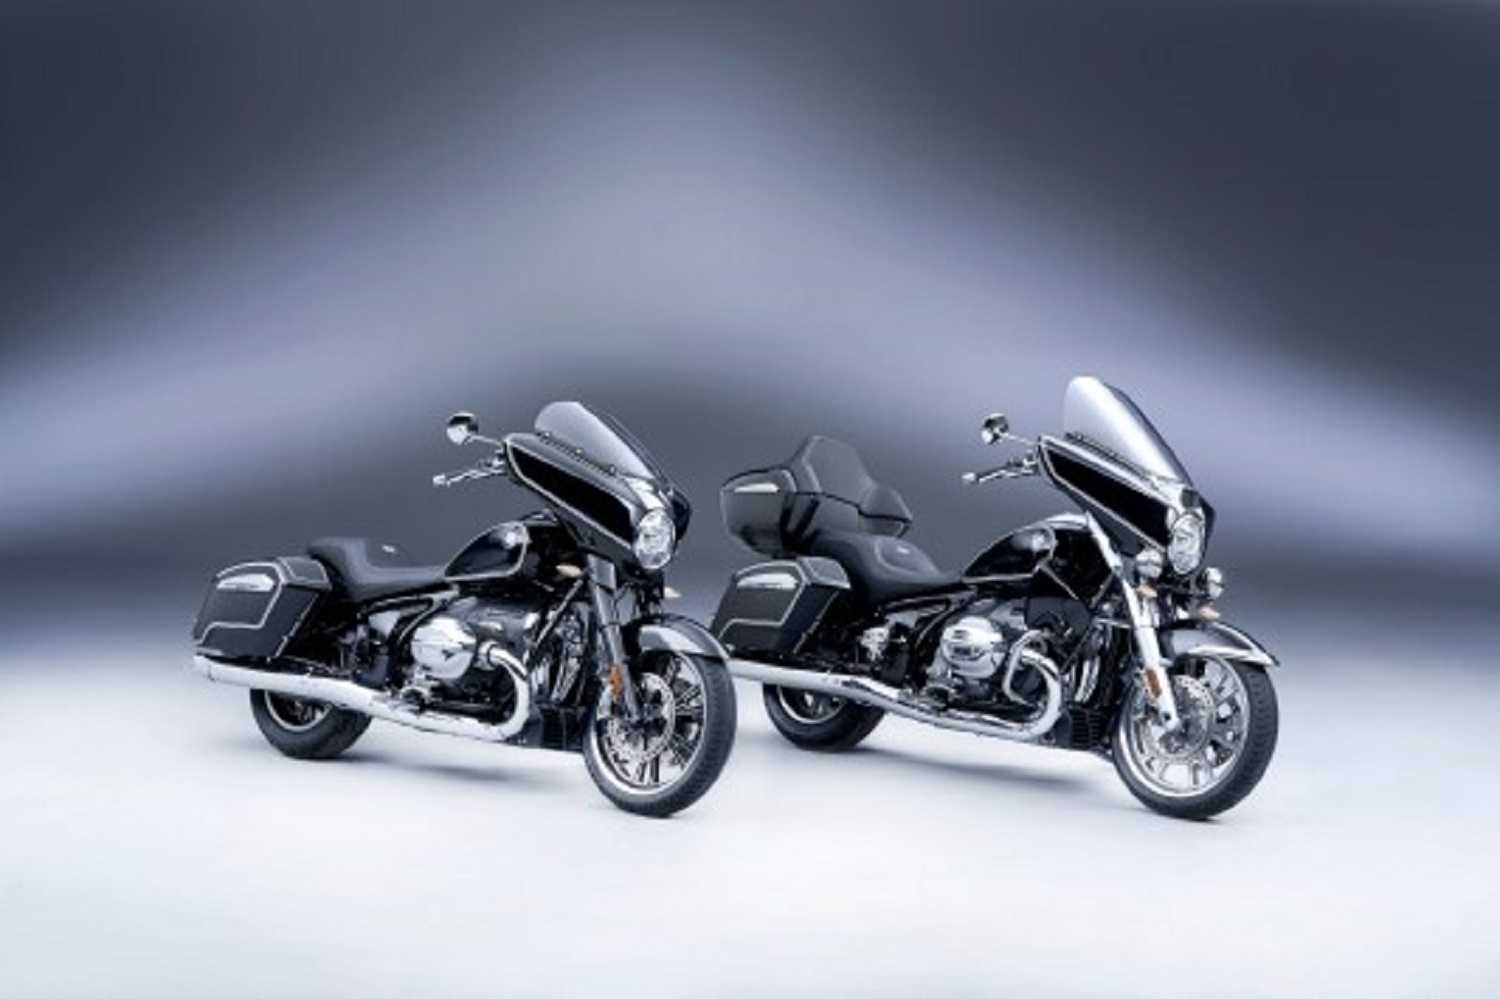 The new 2022 BMW R 18 B and R 18 Transcontinental.